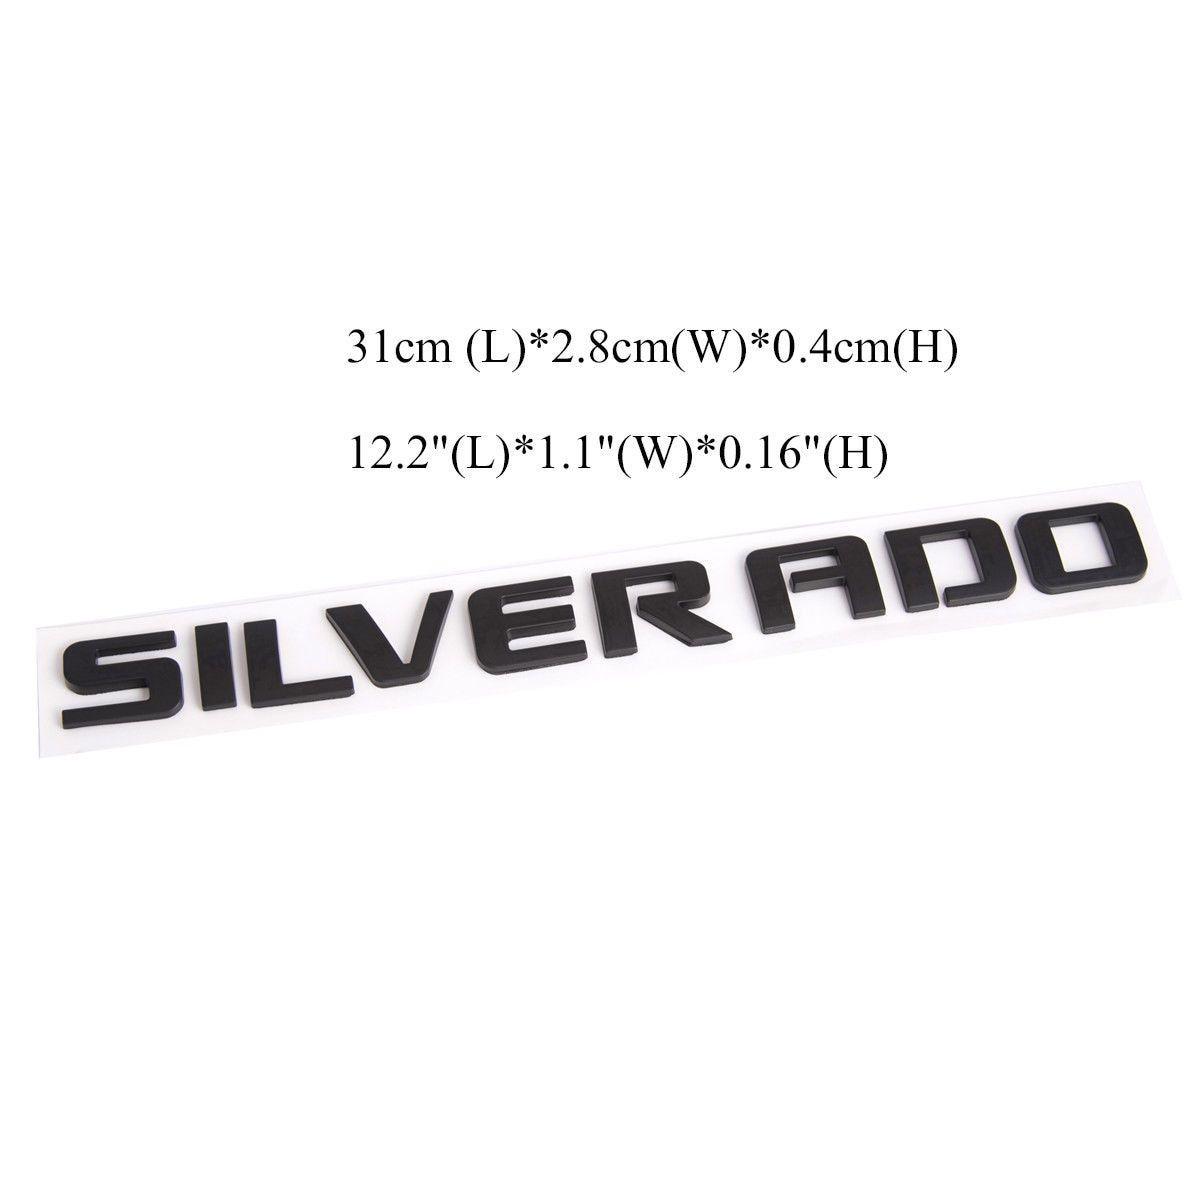 Silverado Logo - US $15.88 |SILVERADO Car Rear Trunk Lid Emblem Nameplates Badge for Chevy  1500 2500 3500-in Car Stickers from Automobiles & Motorcycles on ...